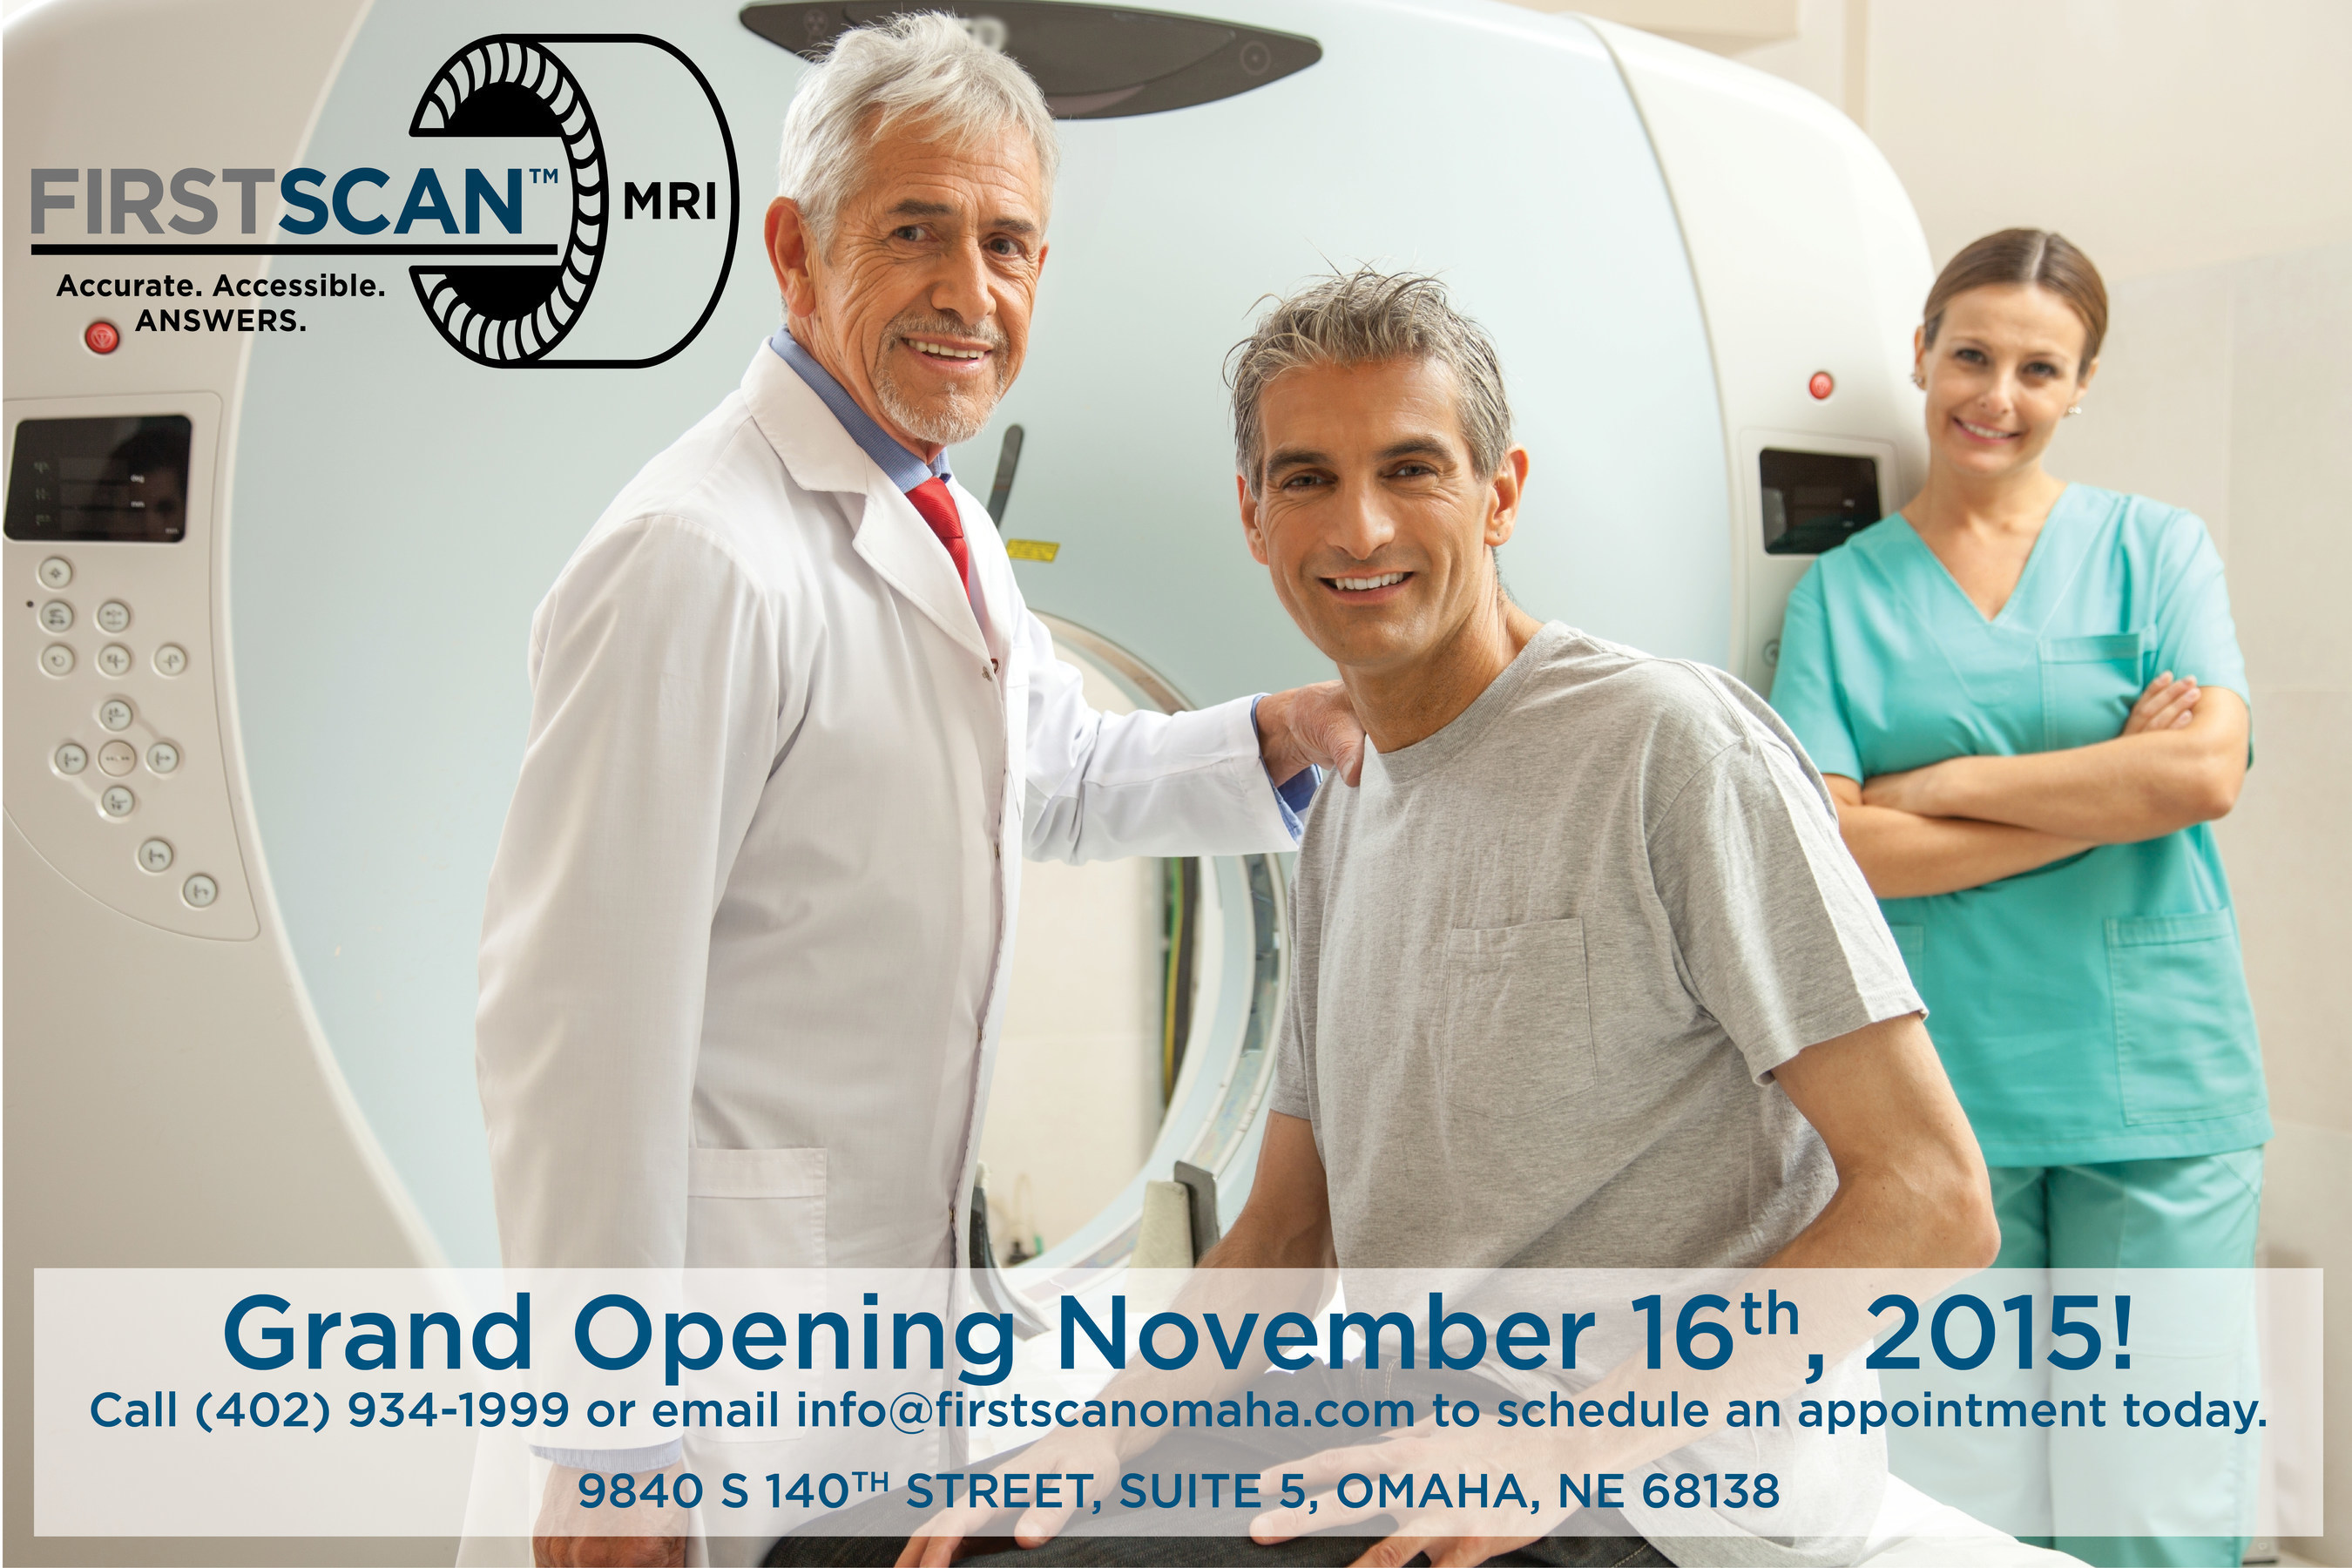 Omaha-based Company FirstScan introduces first and only clinic dedicated to MRI screening prostate cancer.